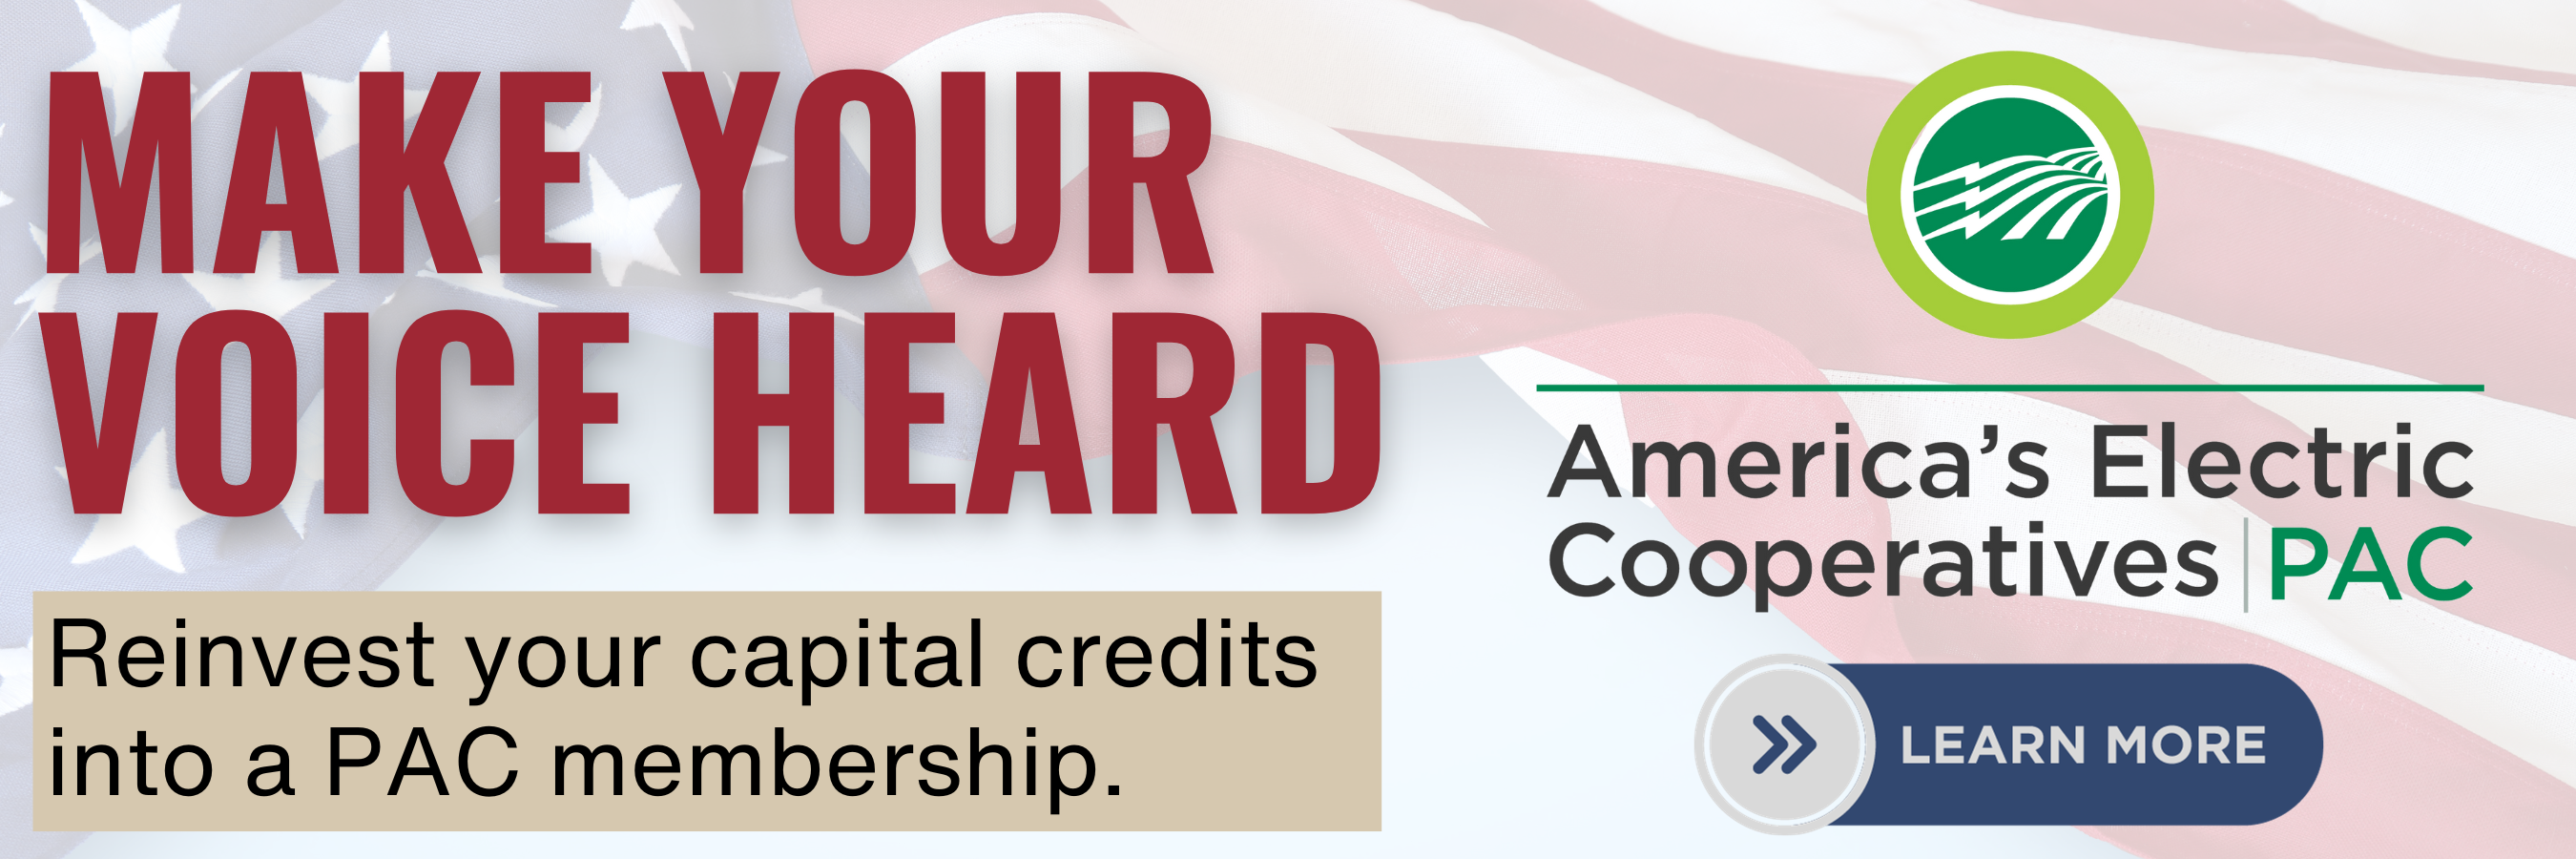 Reinvest your capital credits into a PAC membership. Click to learn more